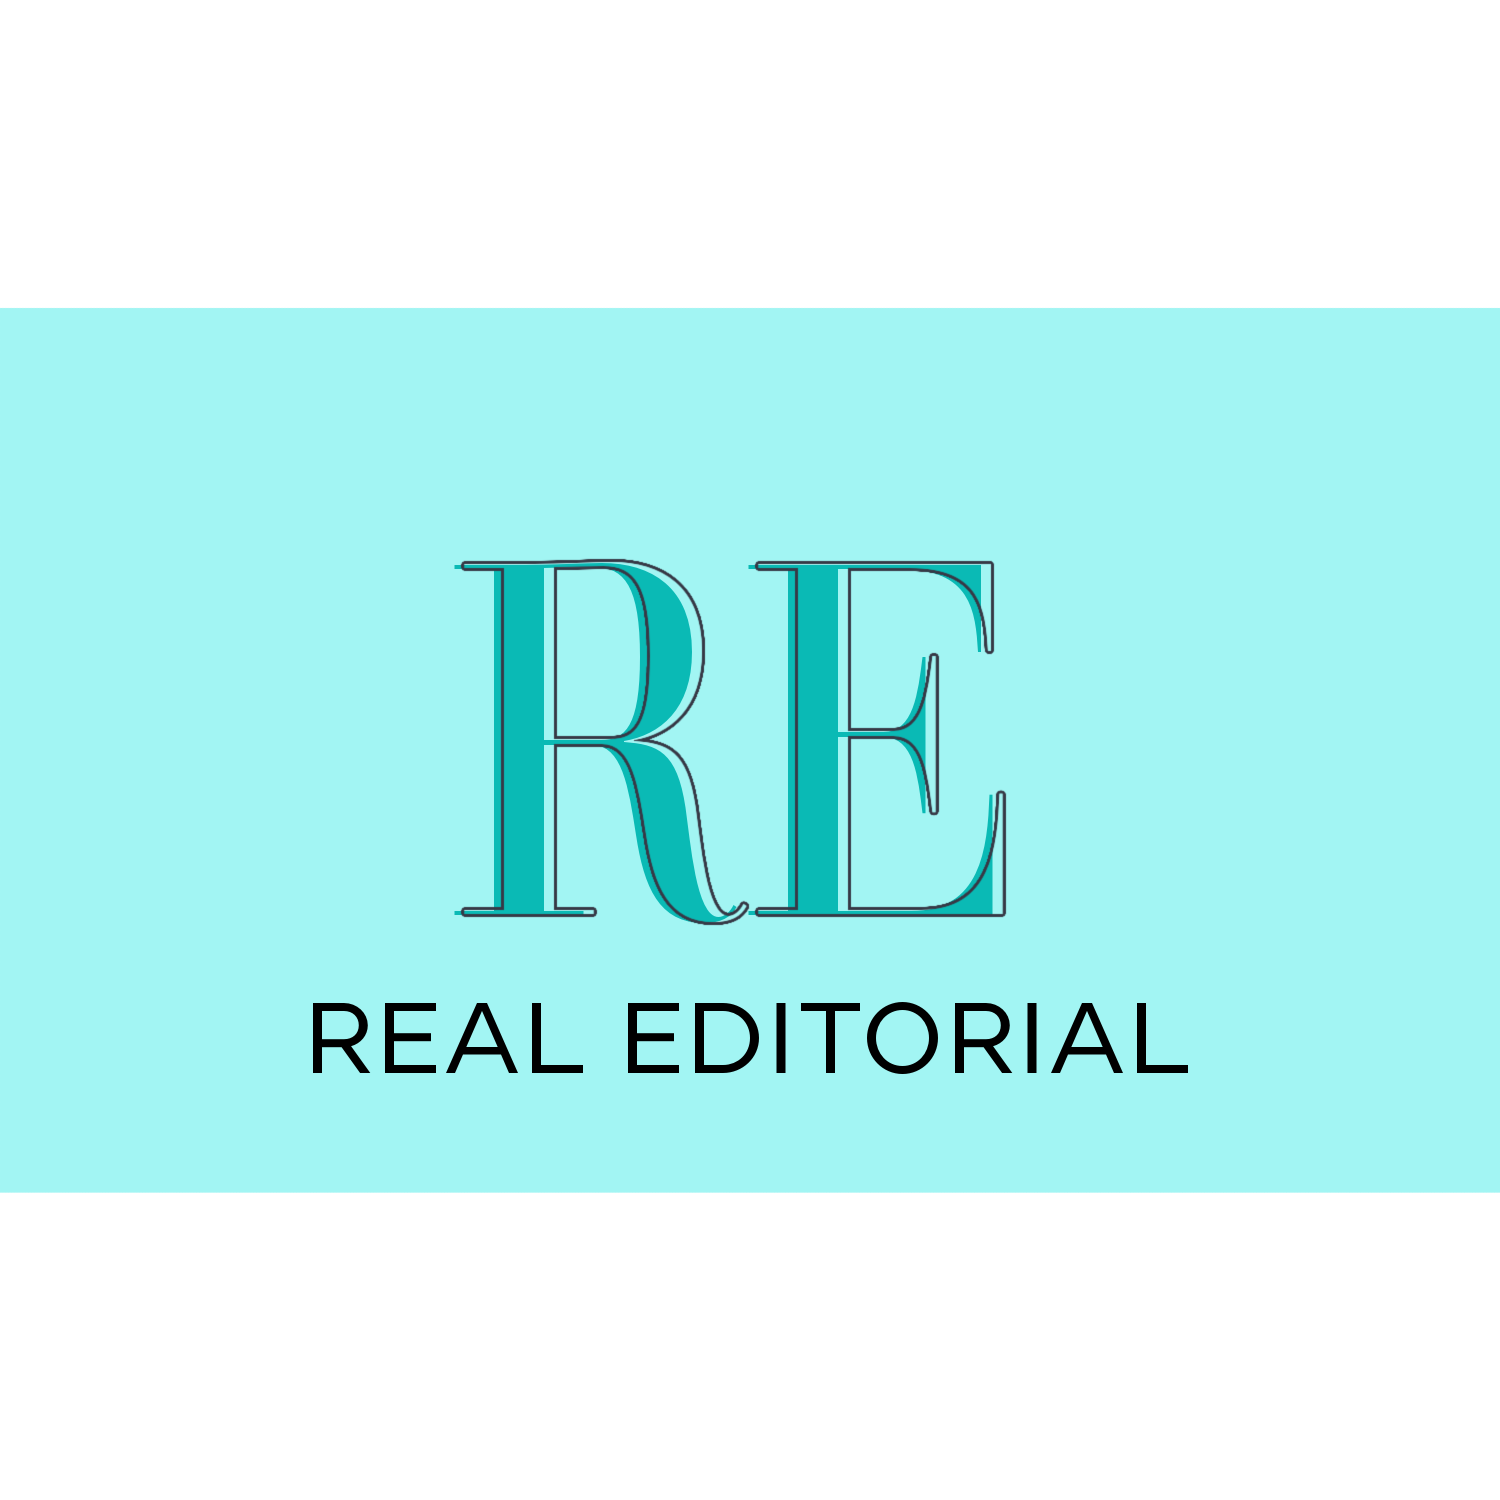 REAL EDITORIAL